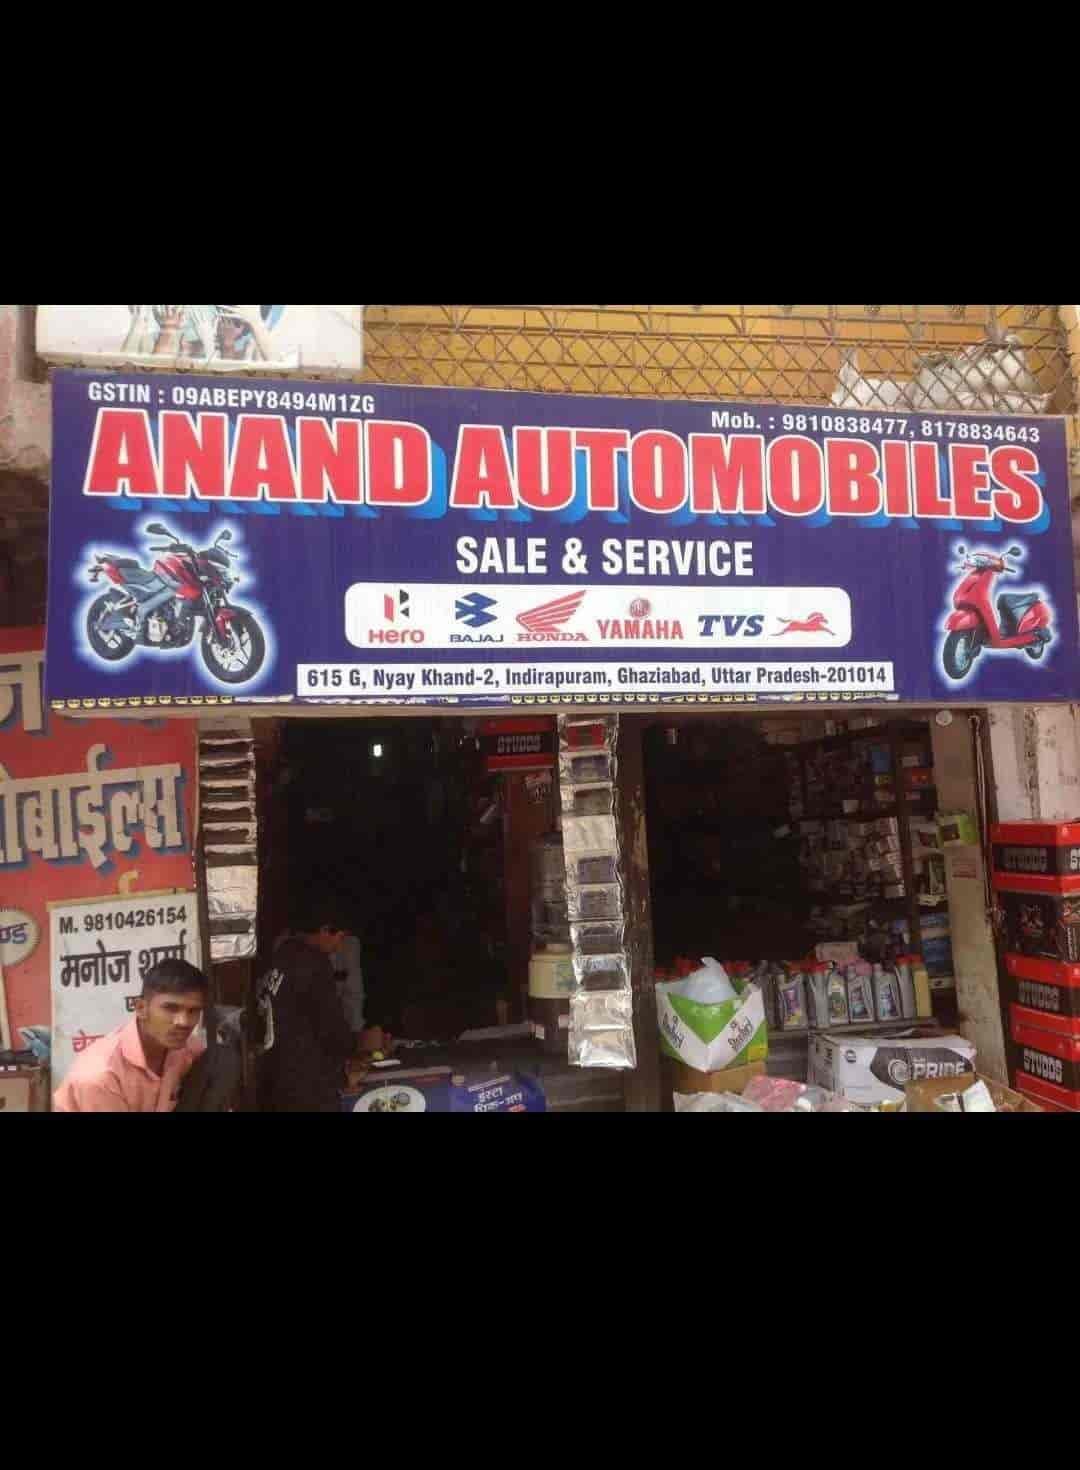 Anand Automobiles